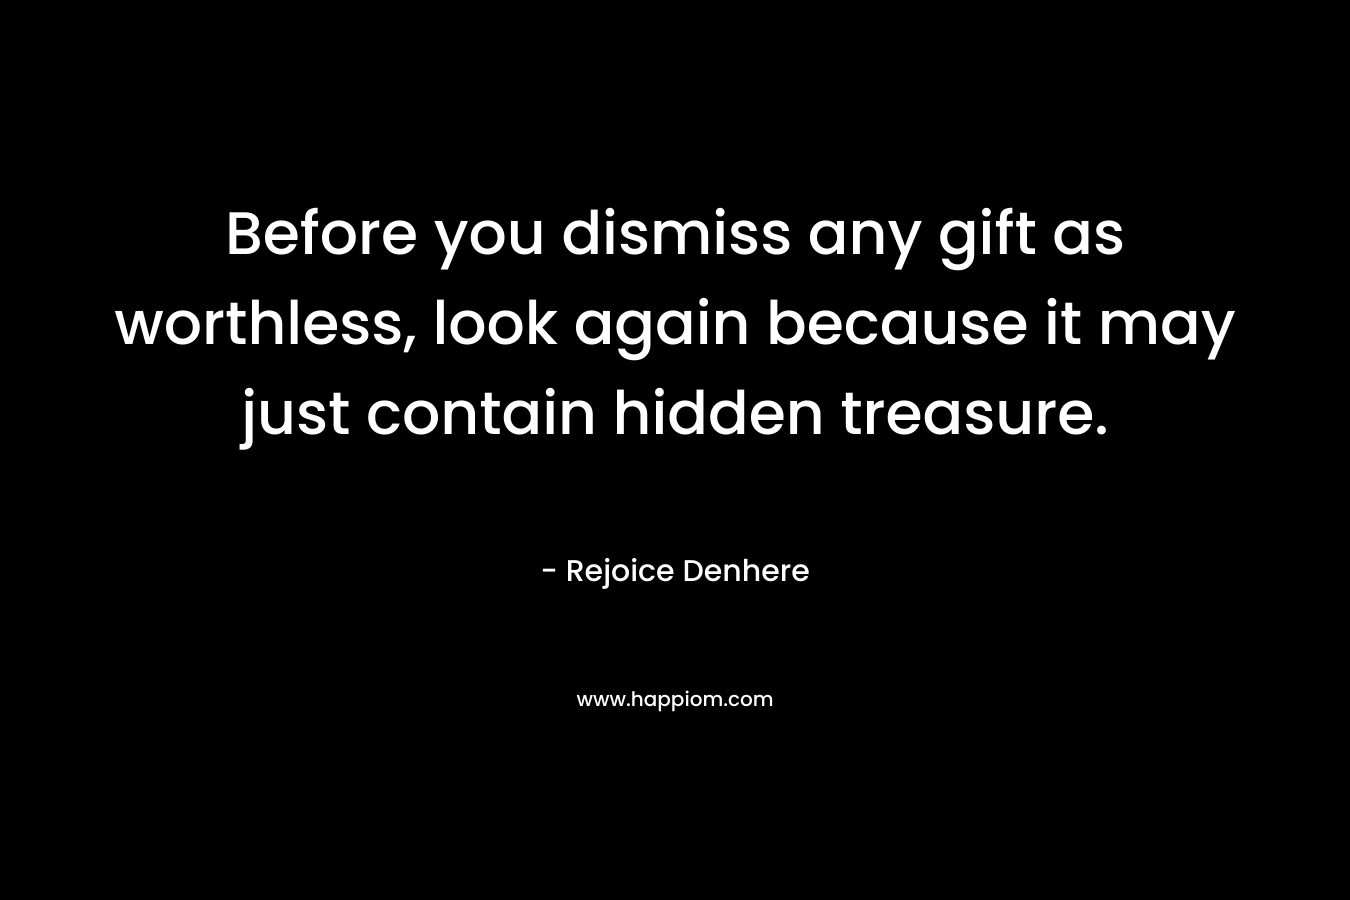 Before you dismiss any gift as worthless, look again because it may just contain hidden treasure.